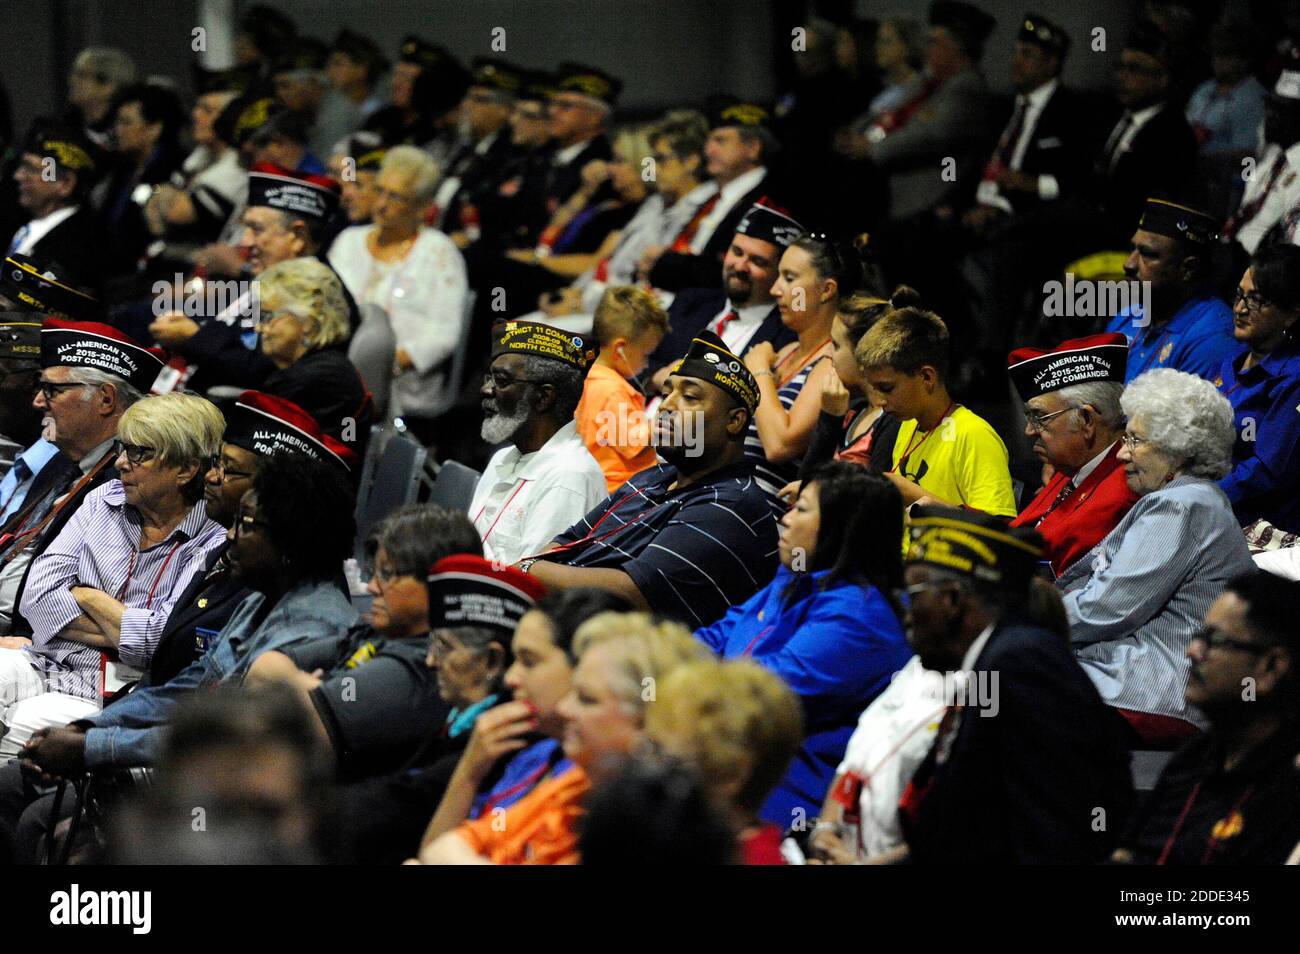 NO FILM, NO VIDEO, NO TV, NO DOCUMENTARY - Audience members listen as Hillary Clinton, the presumptive Democratic presidential nominee, addresses the 117th annual VFW National Convention at the Charlotte Convention center on Monday, July 25, 2016 in Charlotte, NC, USA. Photo by David T. Foster III/Charlotte Observer/TNS/ABACAPRESS.COM Stock Photo